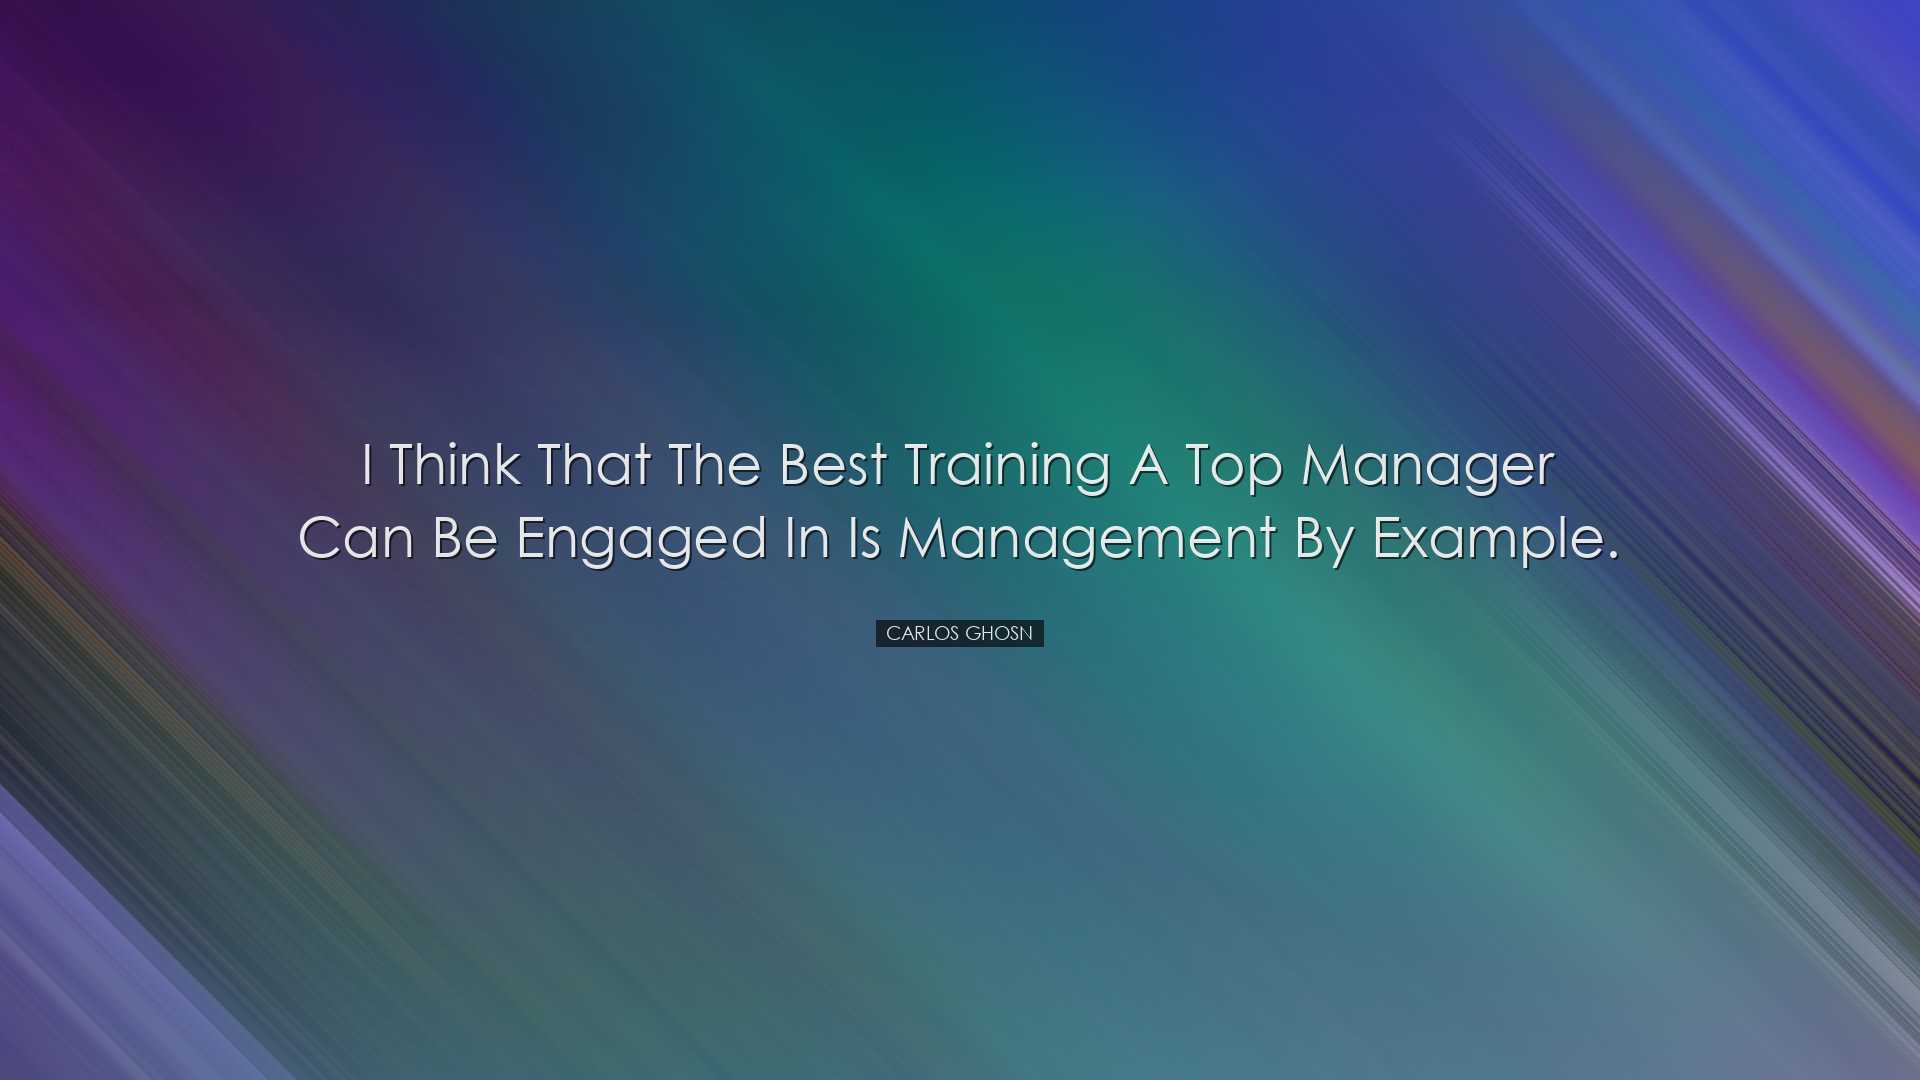 I think that the best training a top manager can be engaged in is